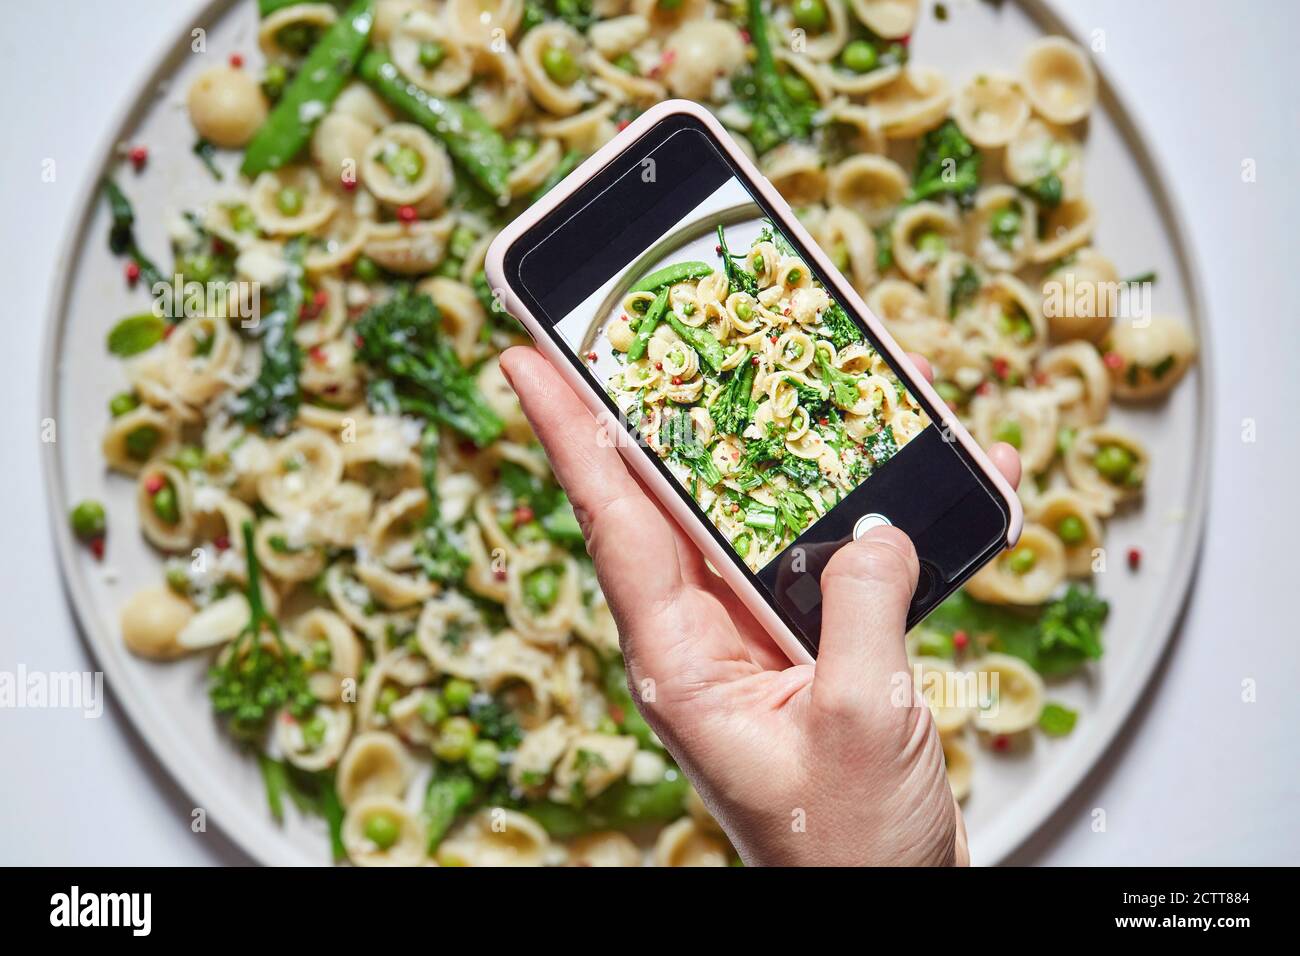 Woman's hand photographing orecchiette with smartphone Stock Photo